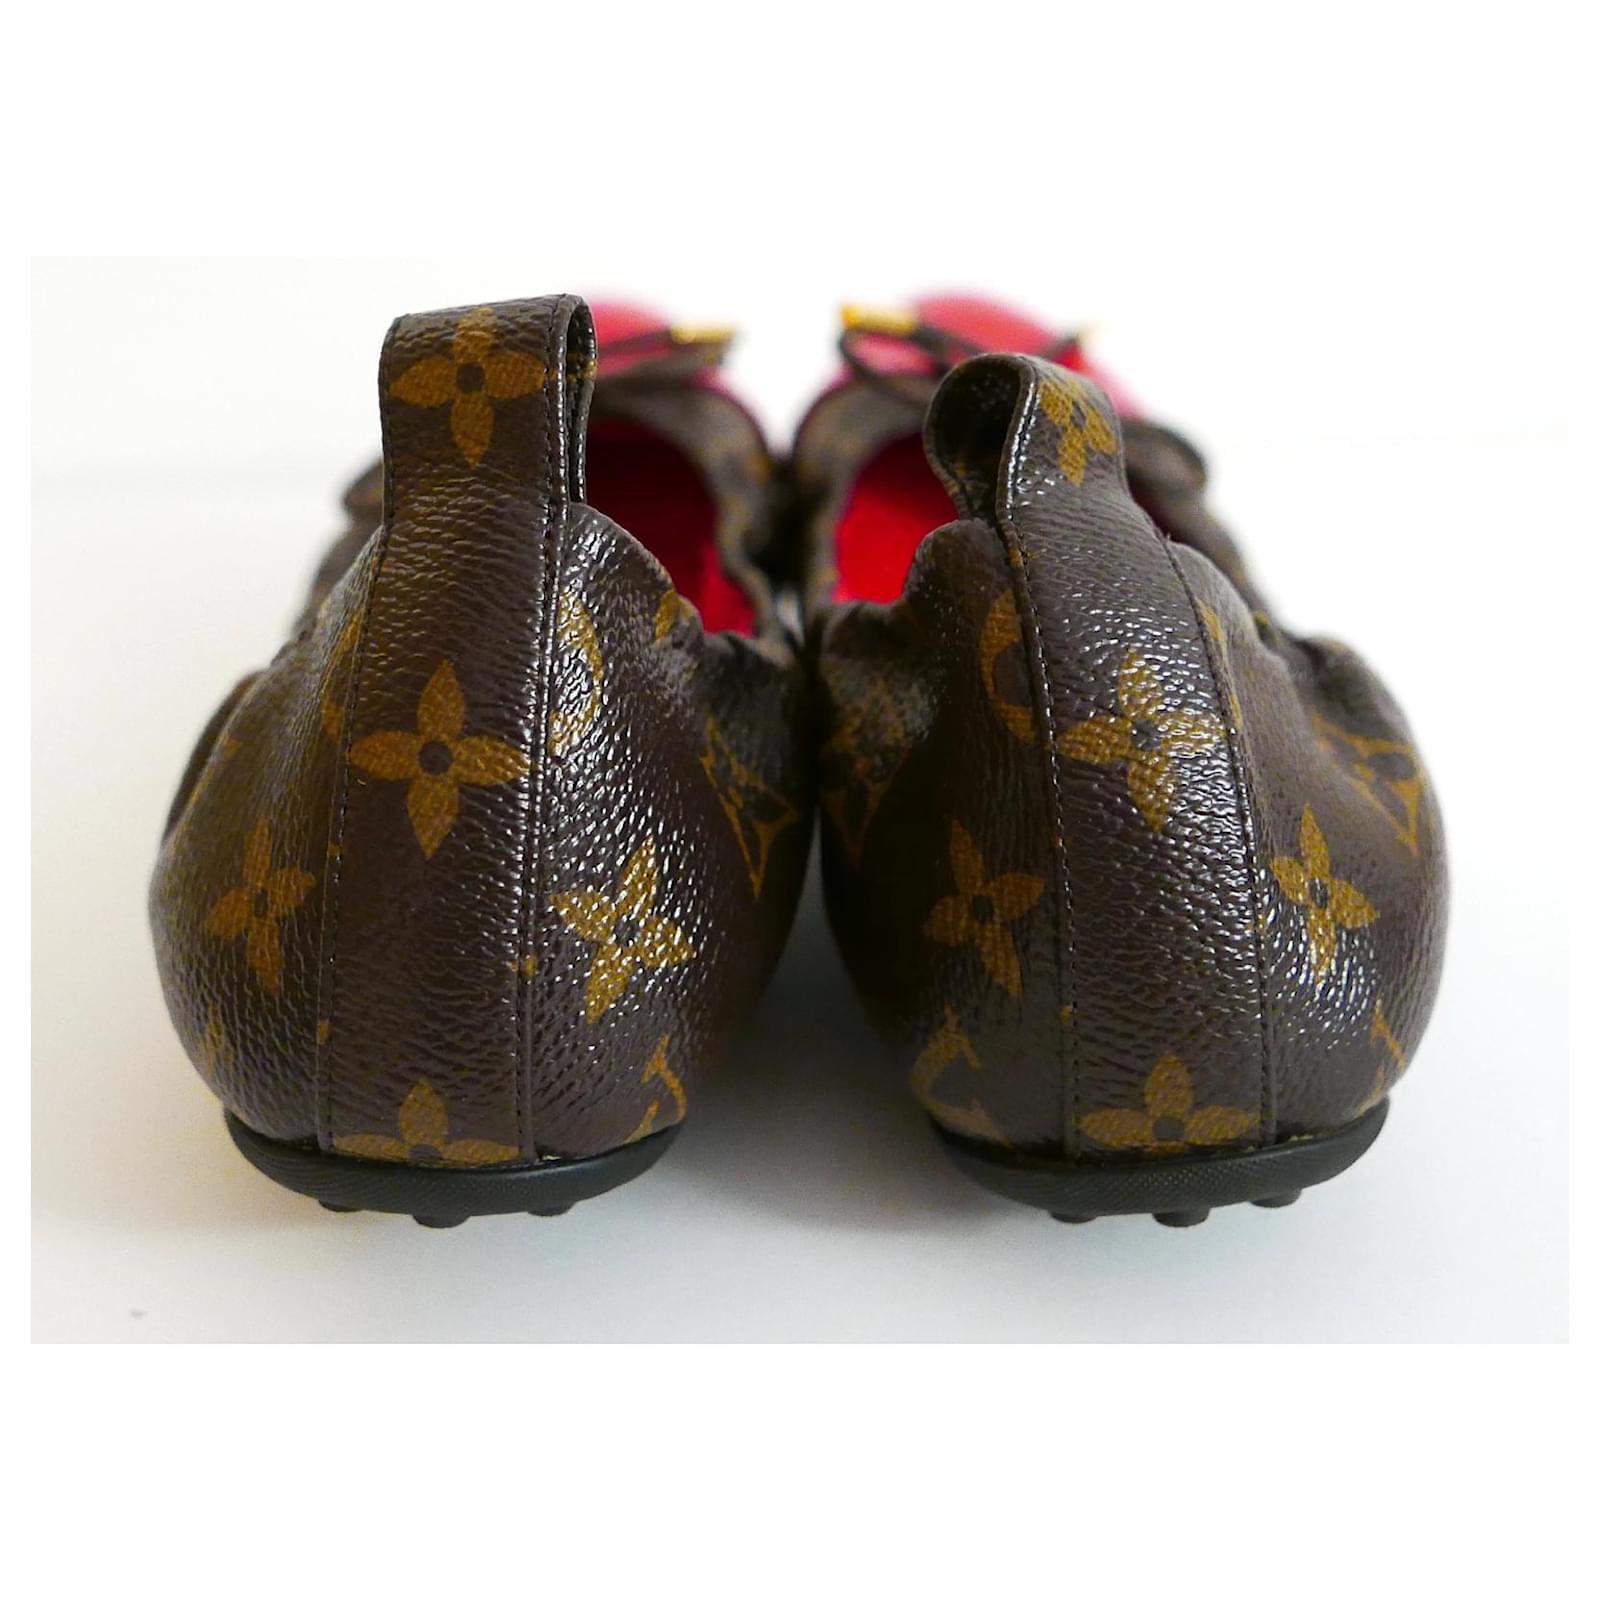 Louis Vuitton Flirty Monogram Ballet Flats In New Condition For Sale In London, GB